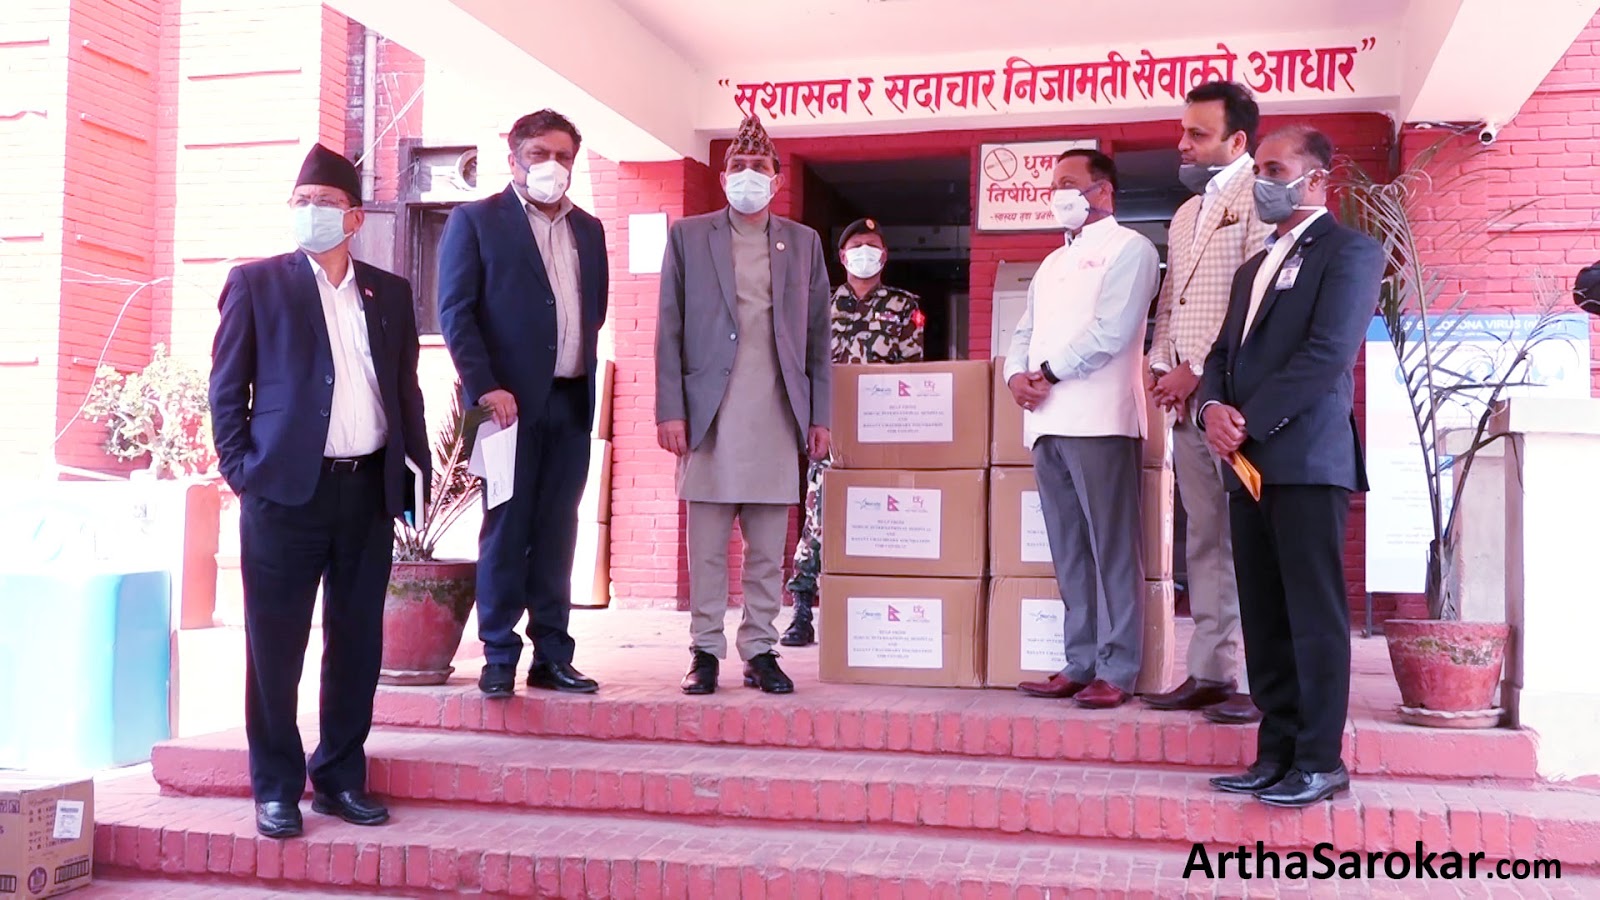 Basanta Chaudhary Foundation provide medical appliances to government (VIDEO)